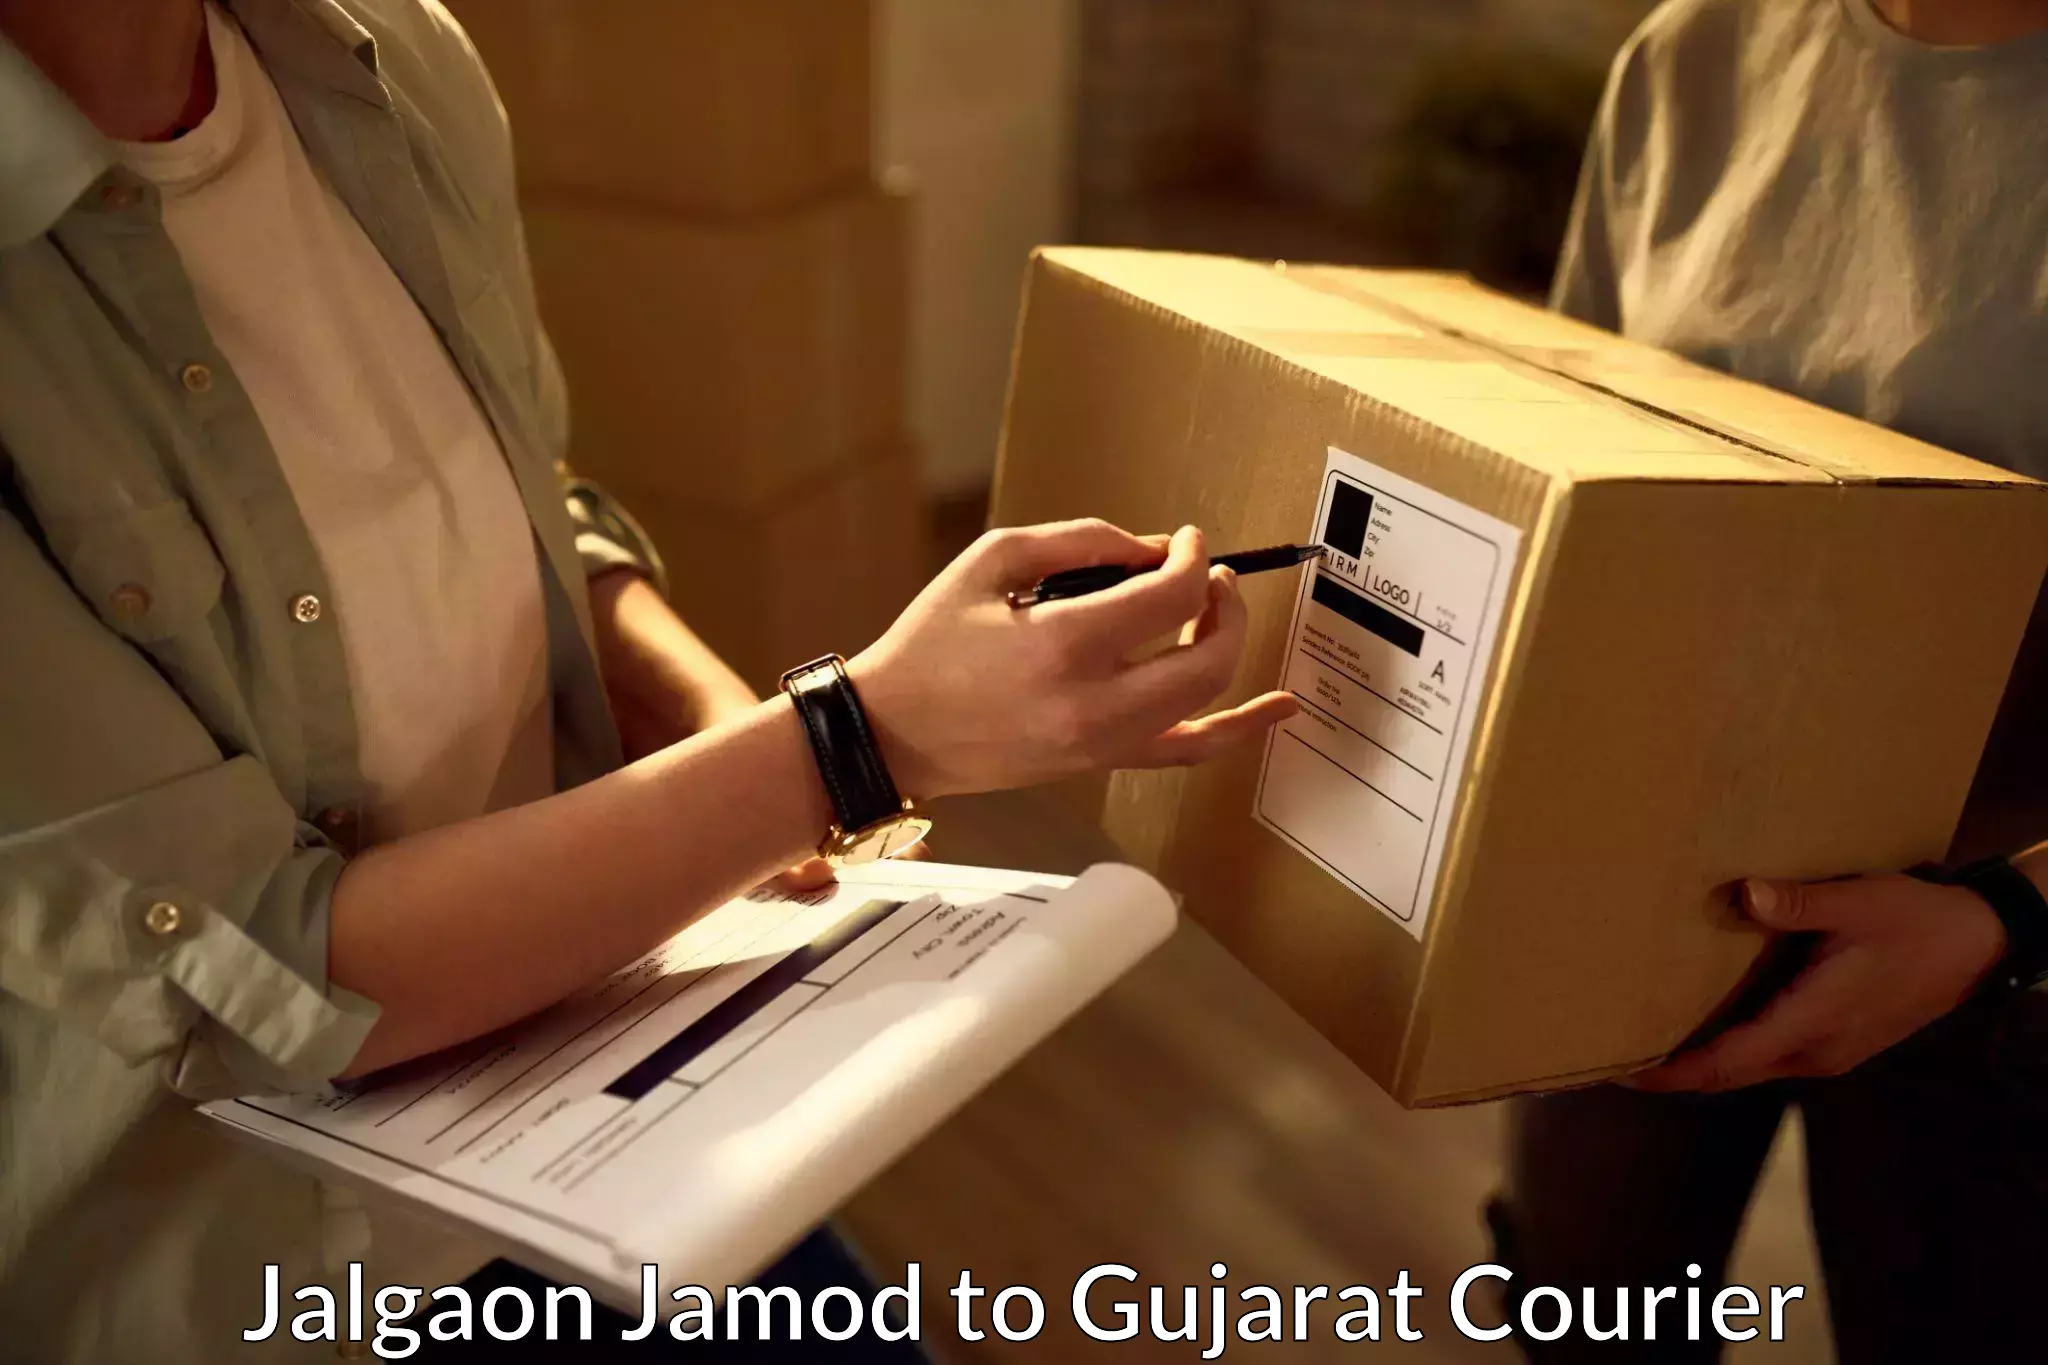 Courier service booking Jalgaon Jamod to Sanand